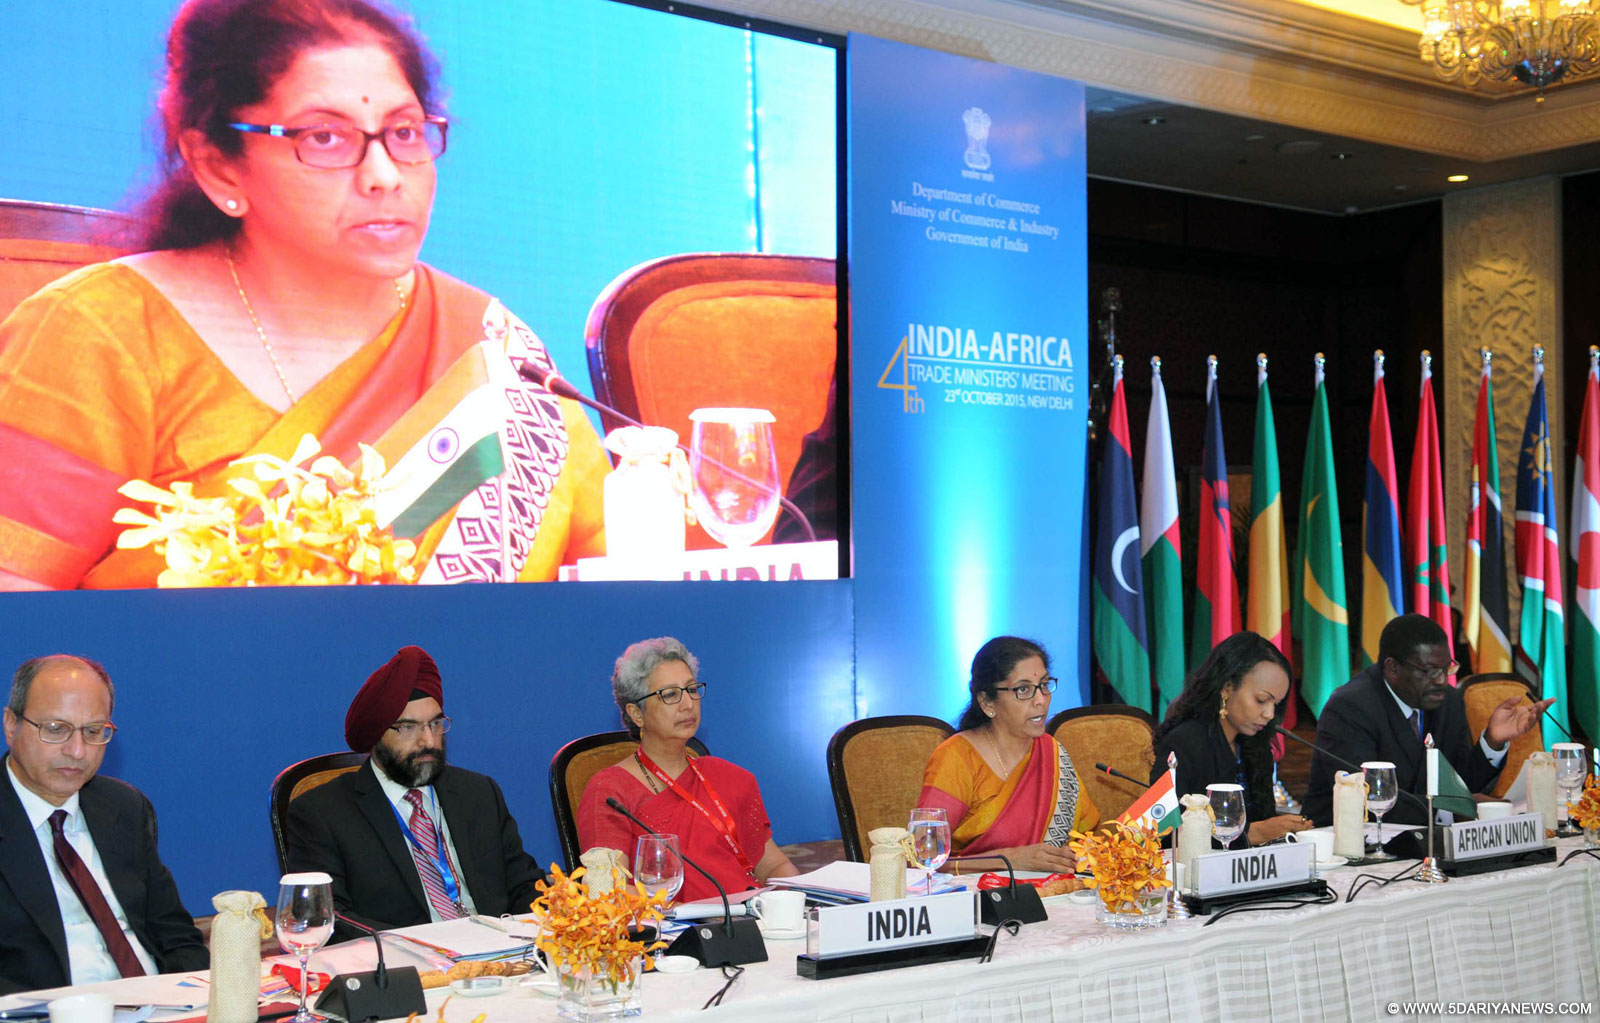 The Minister of State for Commerce & Industry (Independent Charge), Smt. Nirmala Sitharaman addressing the 4th India-Africa Trade Ministers